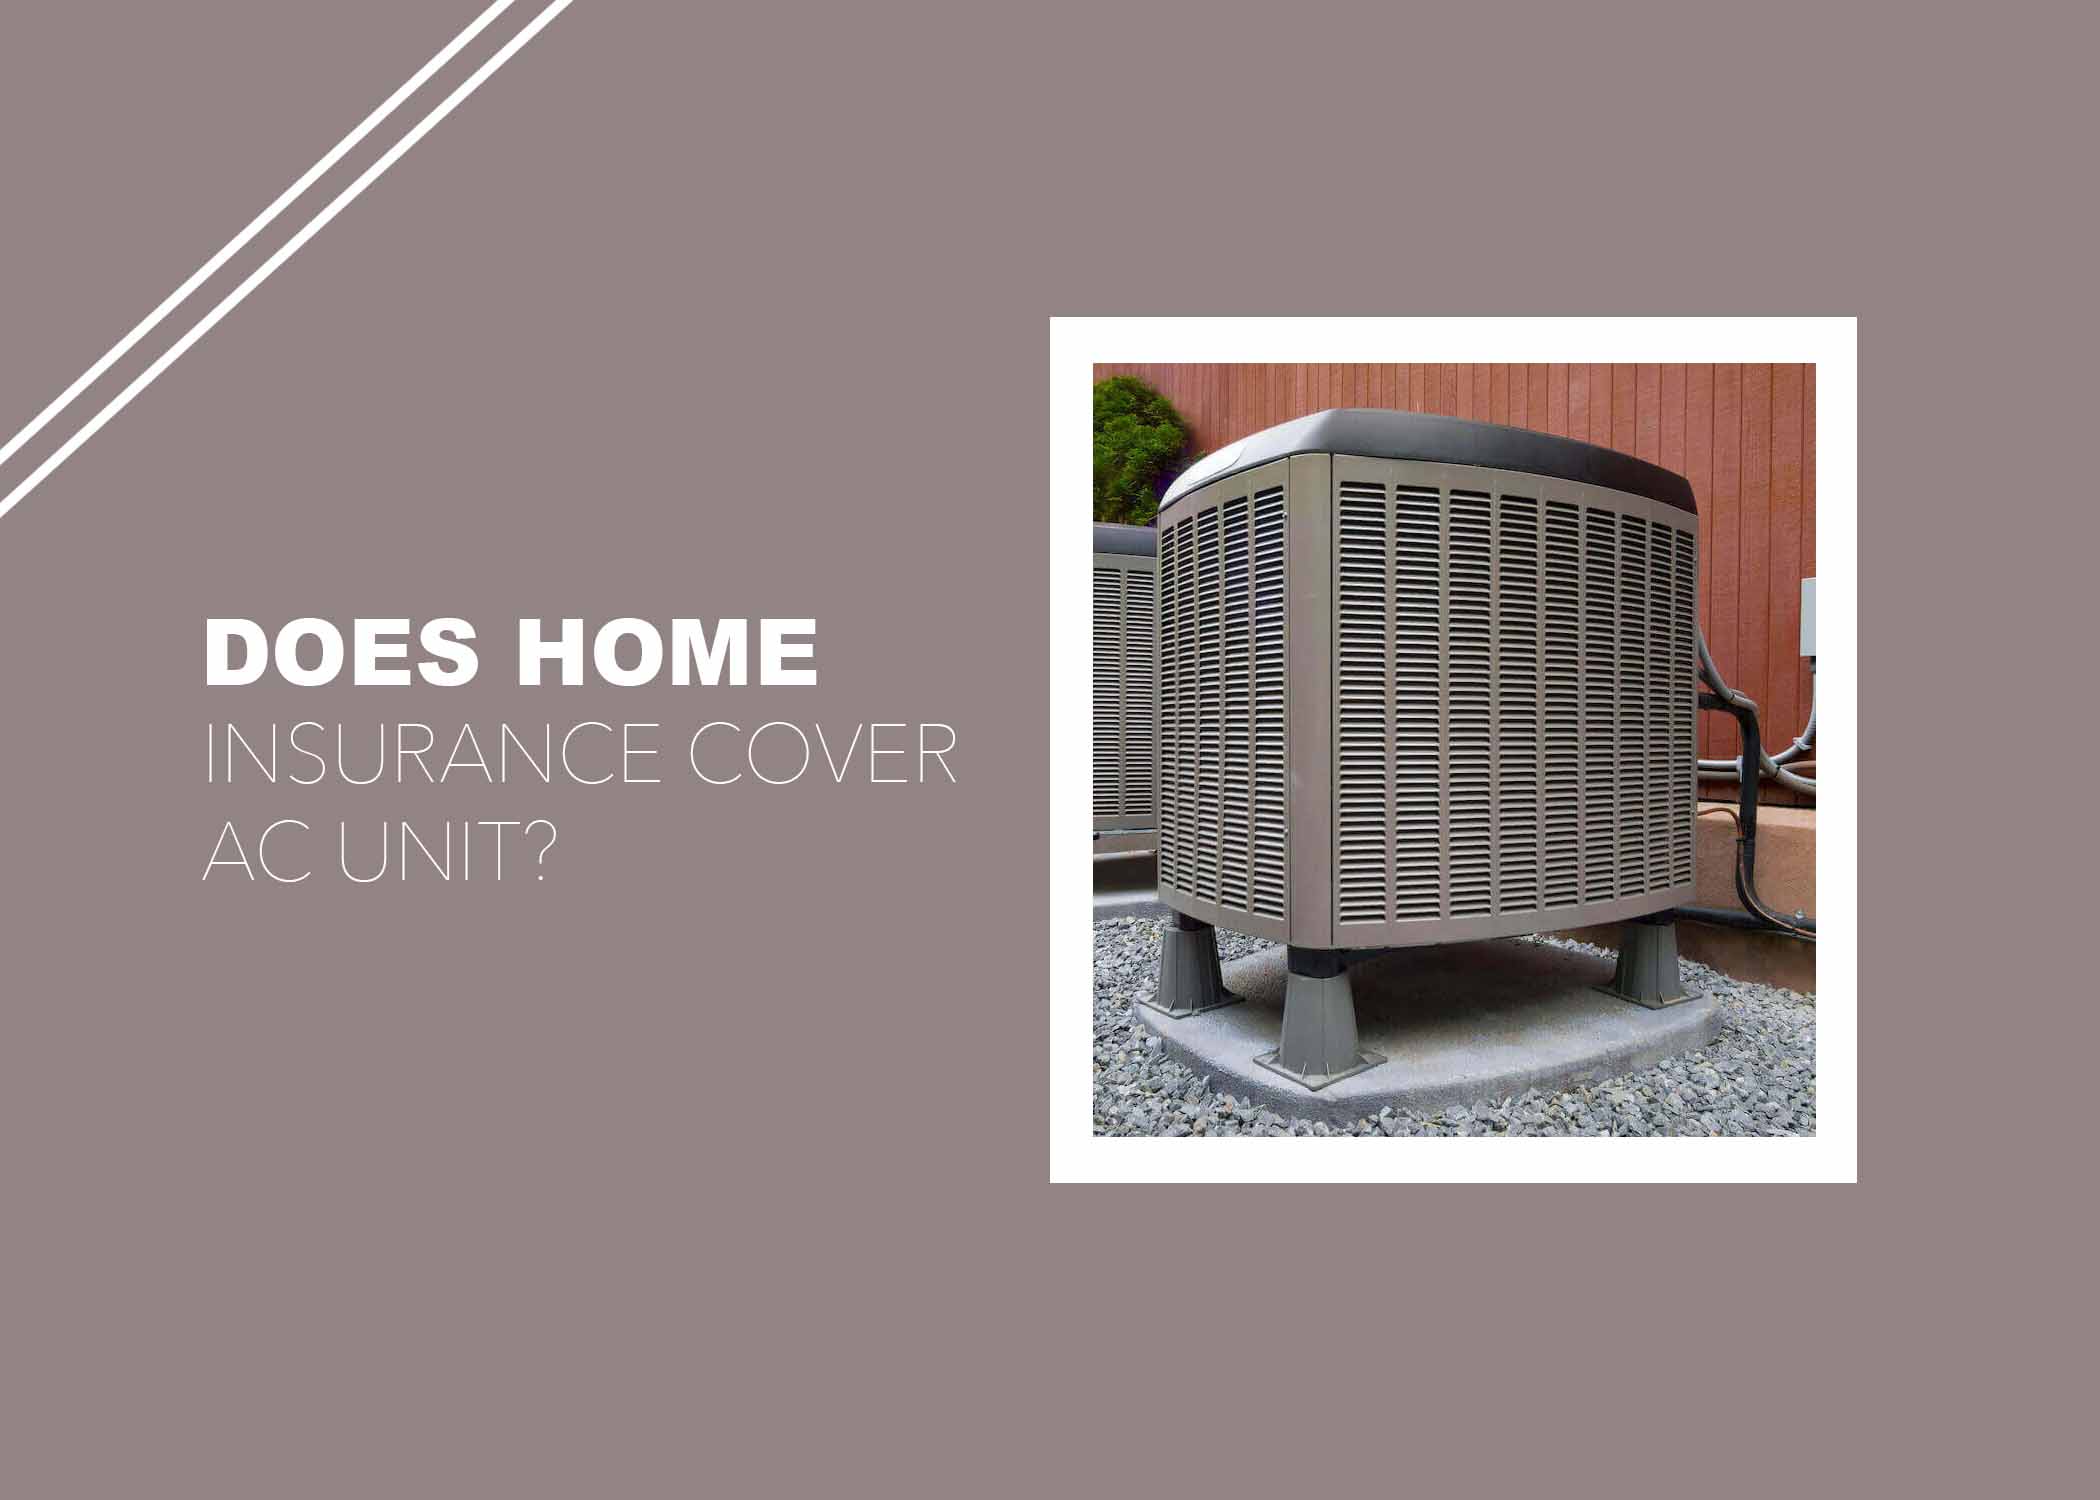 Does Home Insurance Cover AC Unit?